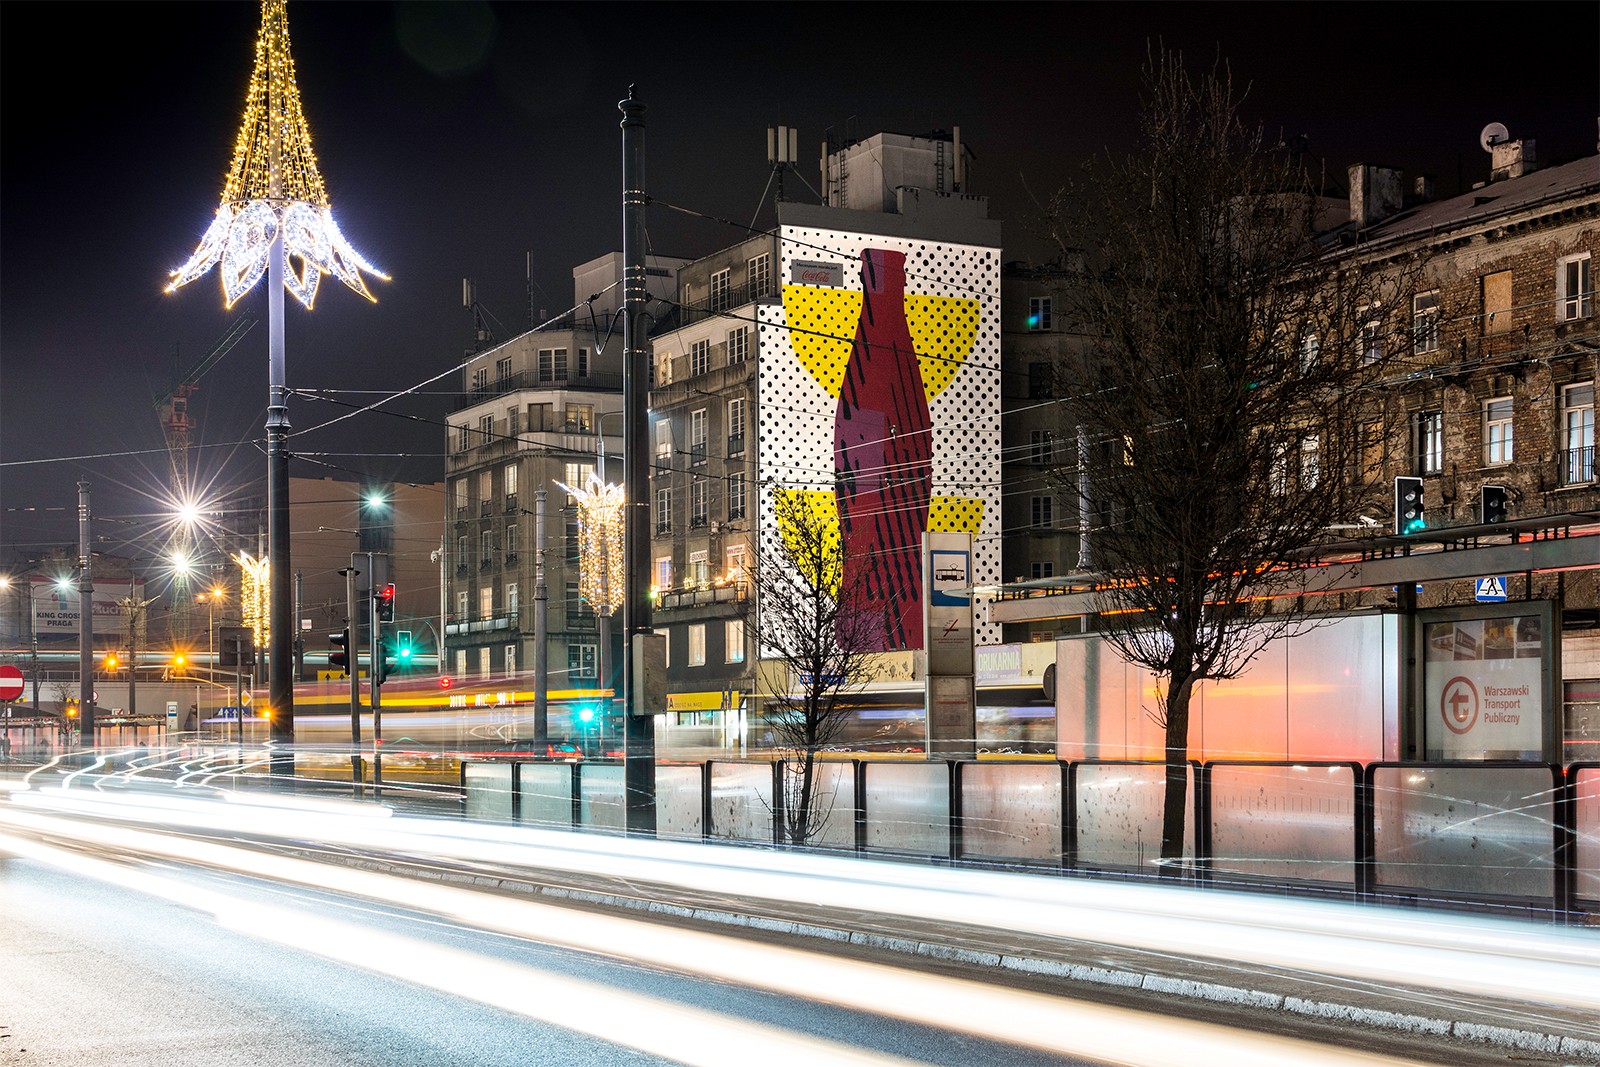 Mural of Coca Cola on the building at the 15 Targowej street in Warsaw | The icon returns | Portfolio